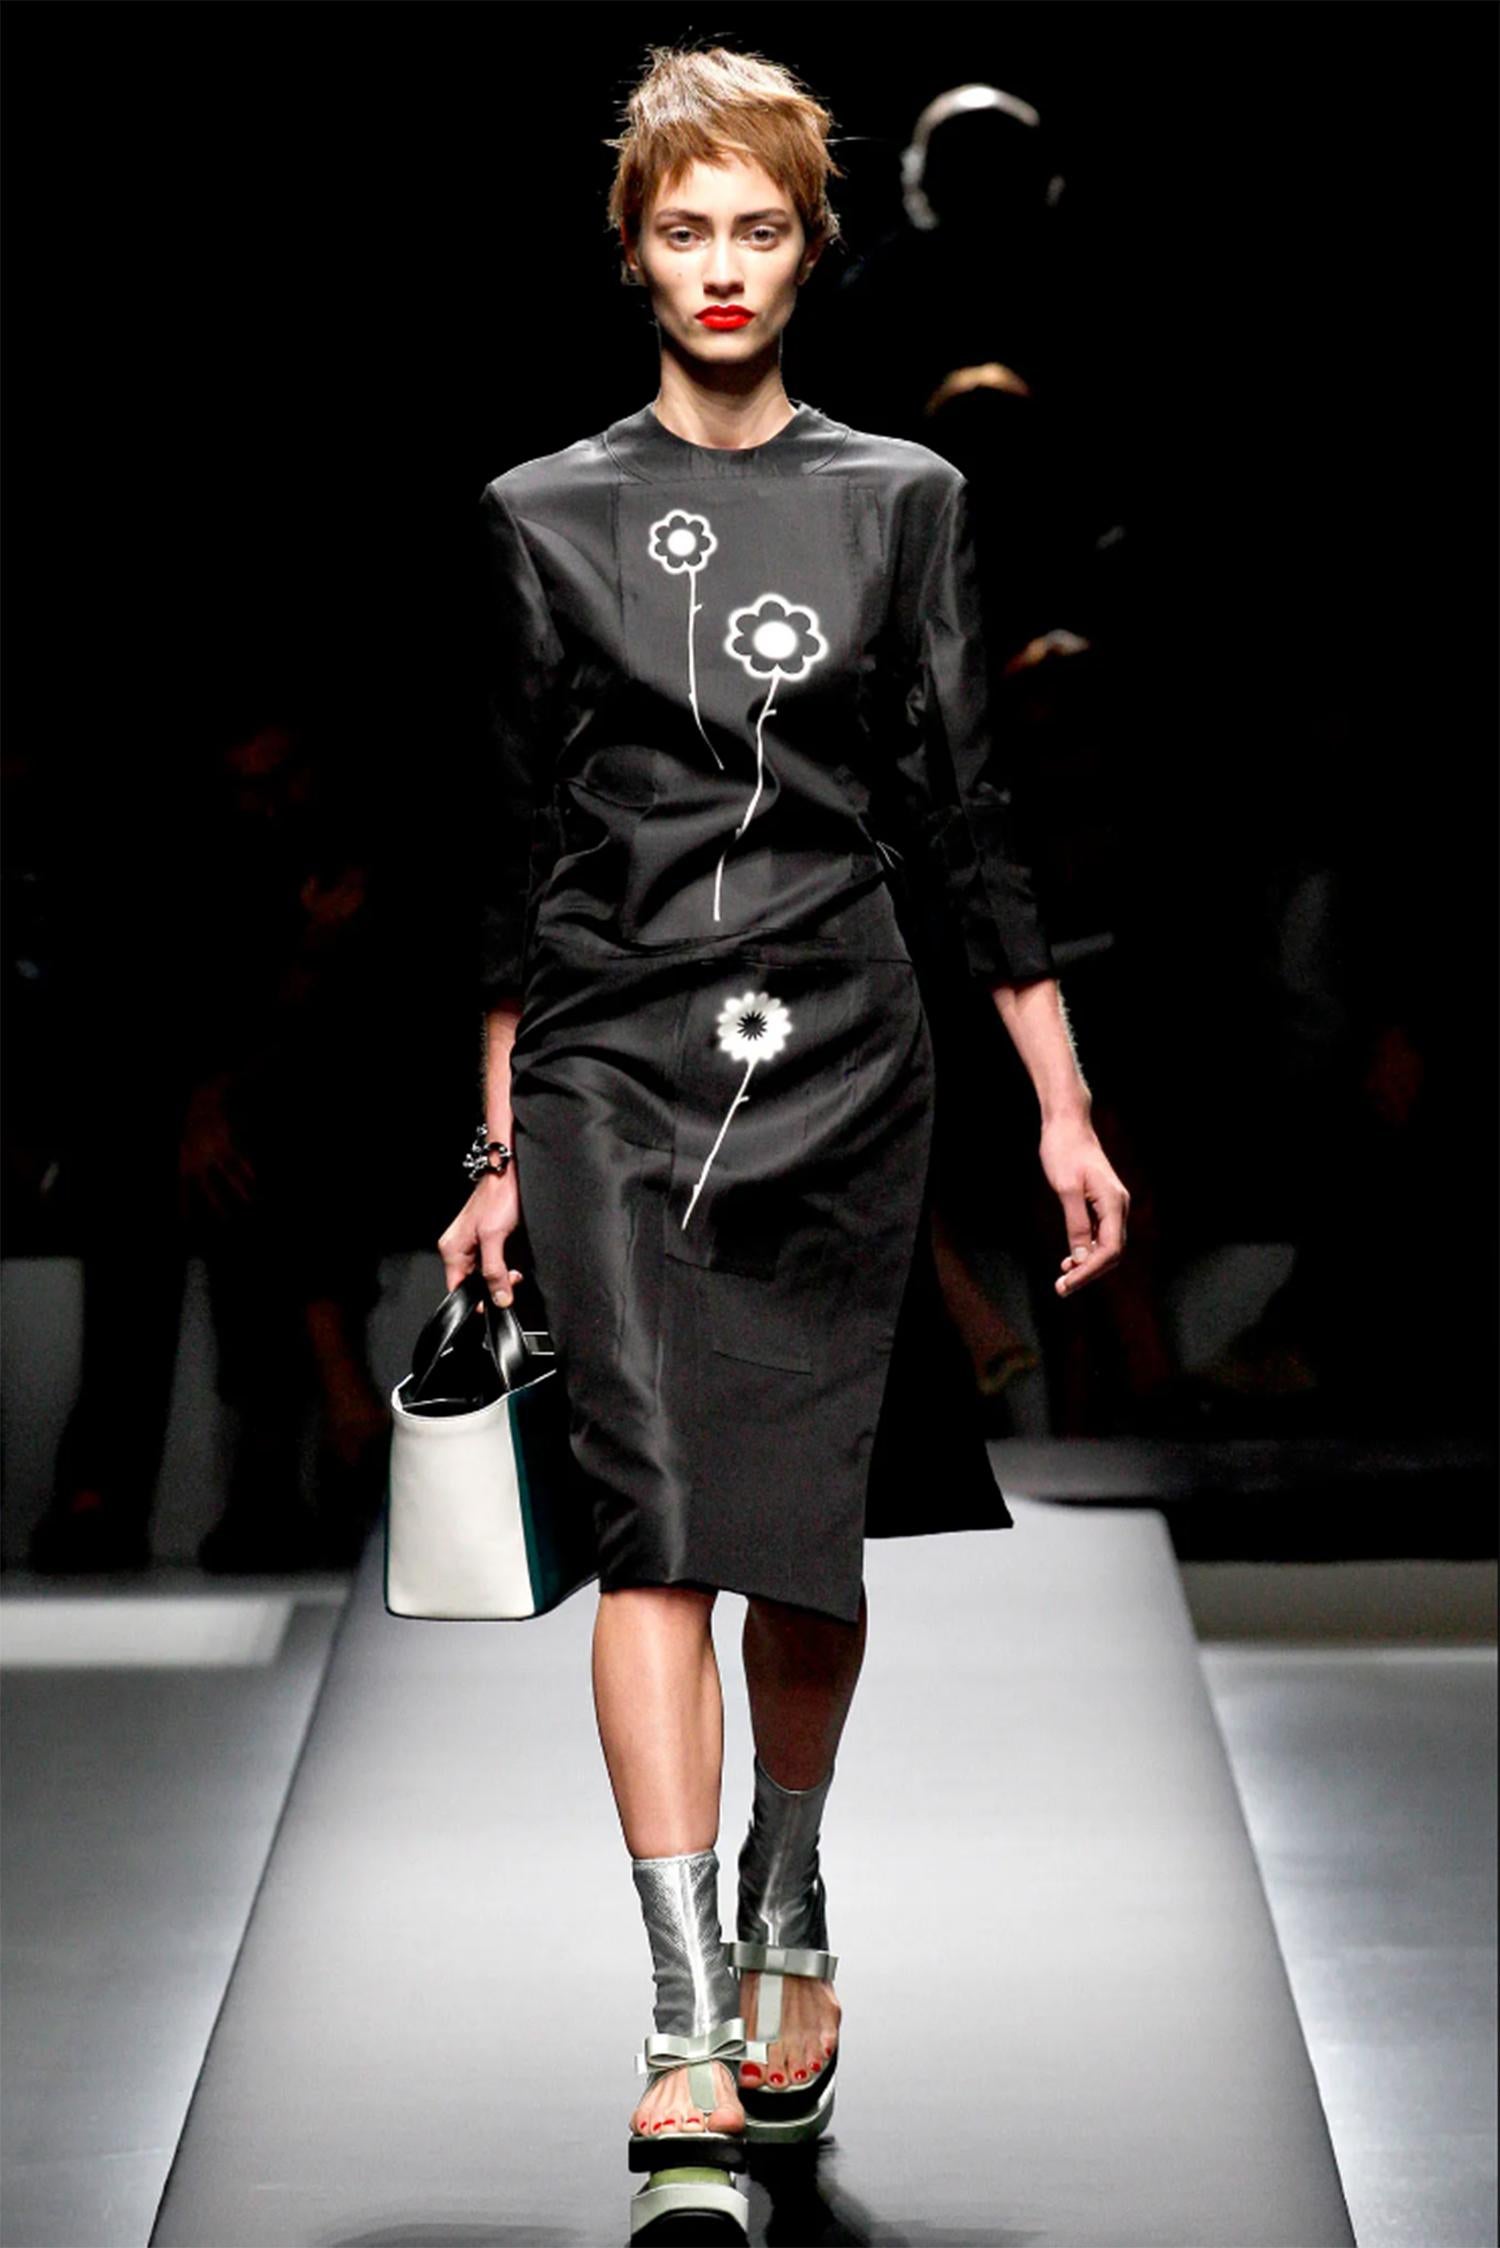 Stunning patent leather tote bag by Prada from their Spring Summer 2013 collection as seen on the runway.

This high-quality bag is made from a beautiful shiny patent leather and features a firm top handle and a detachable long shoulder strap, the